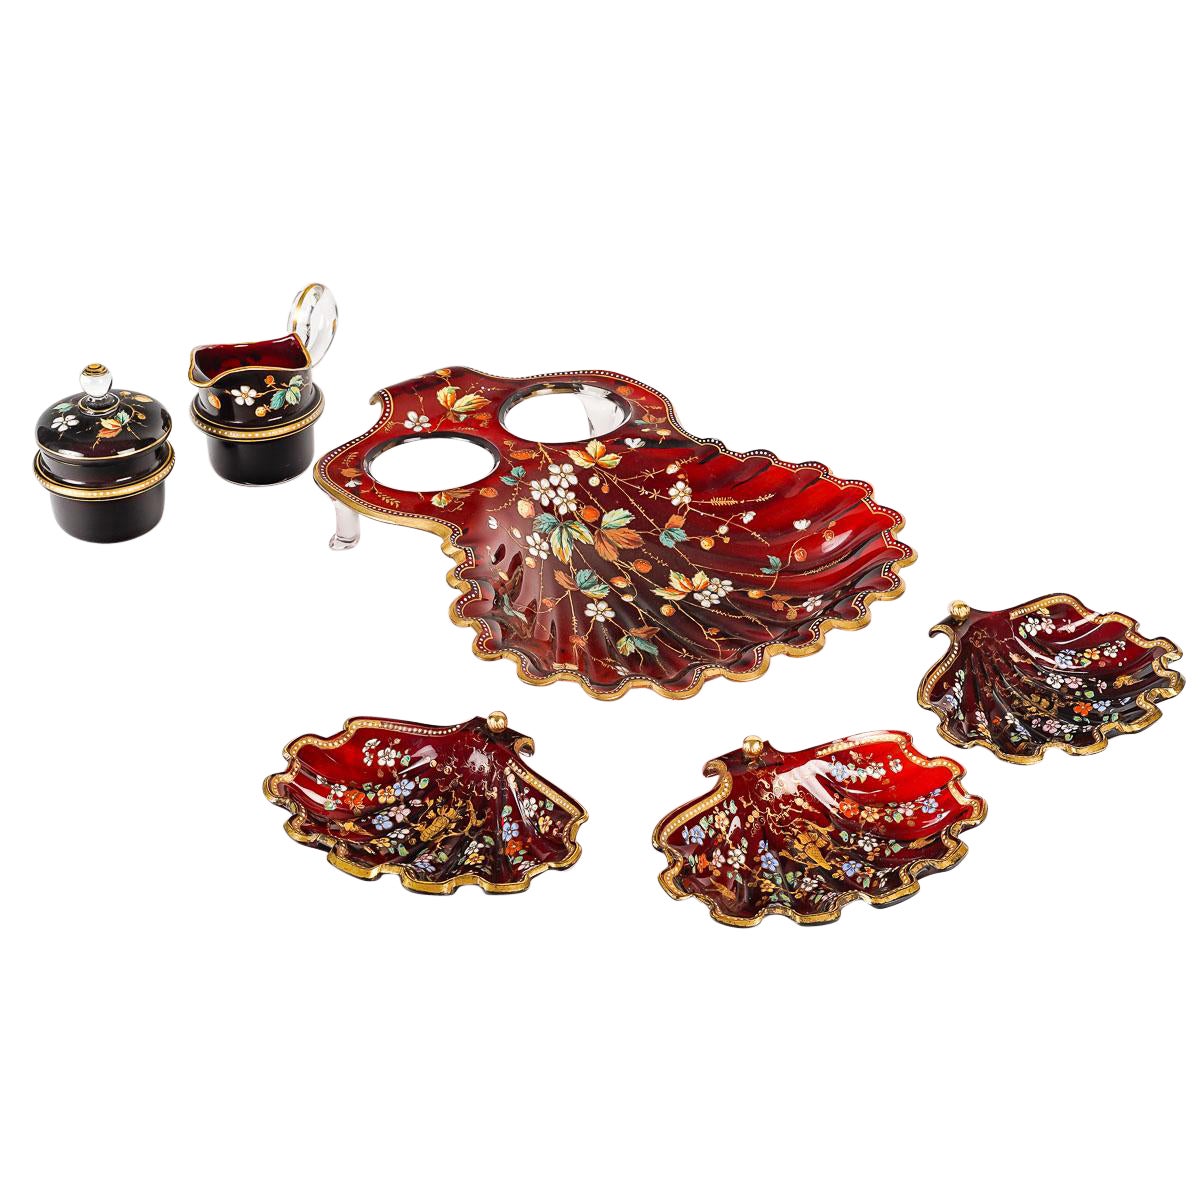 Exceptional Strawberry Dish with its 4 Bohemian Crystal cups For Sale